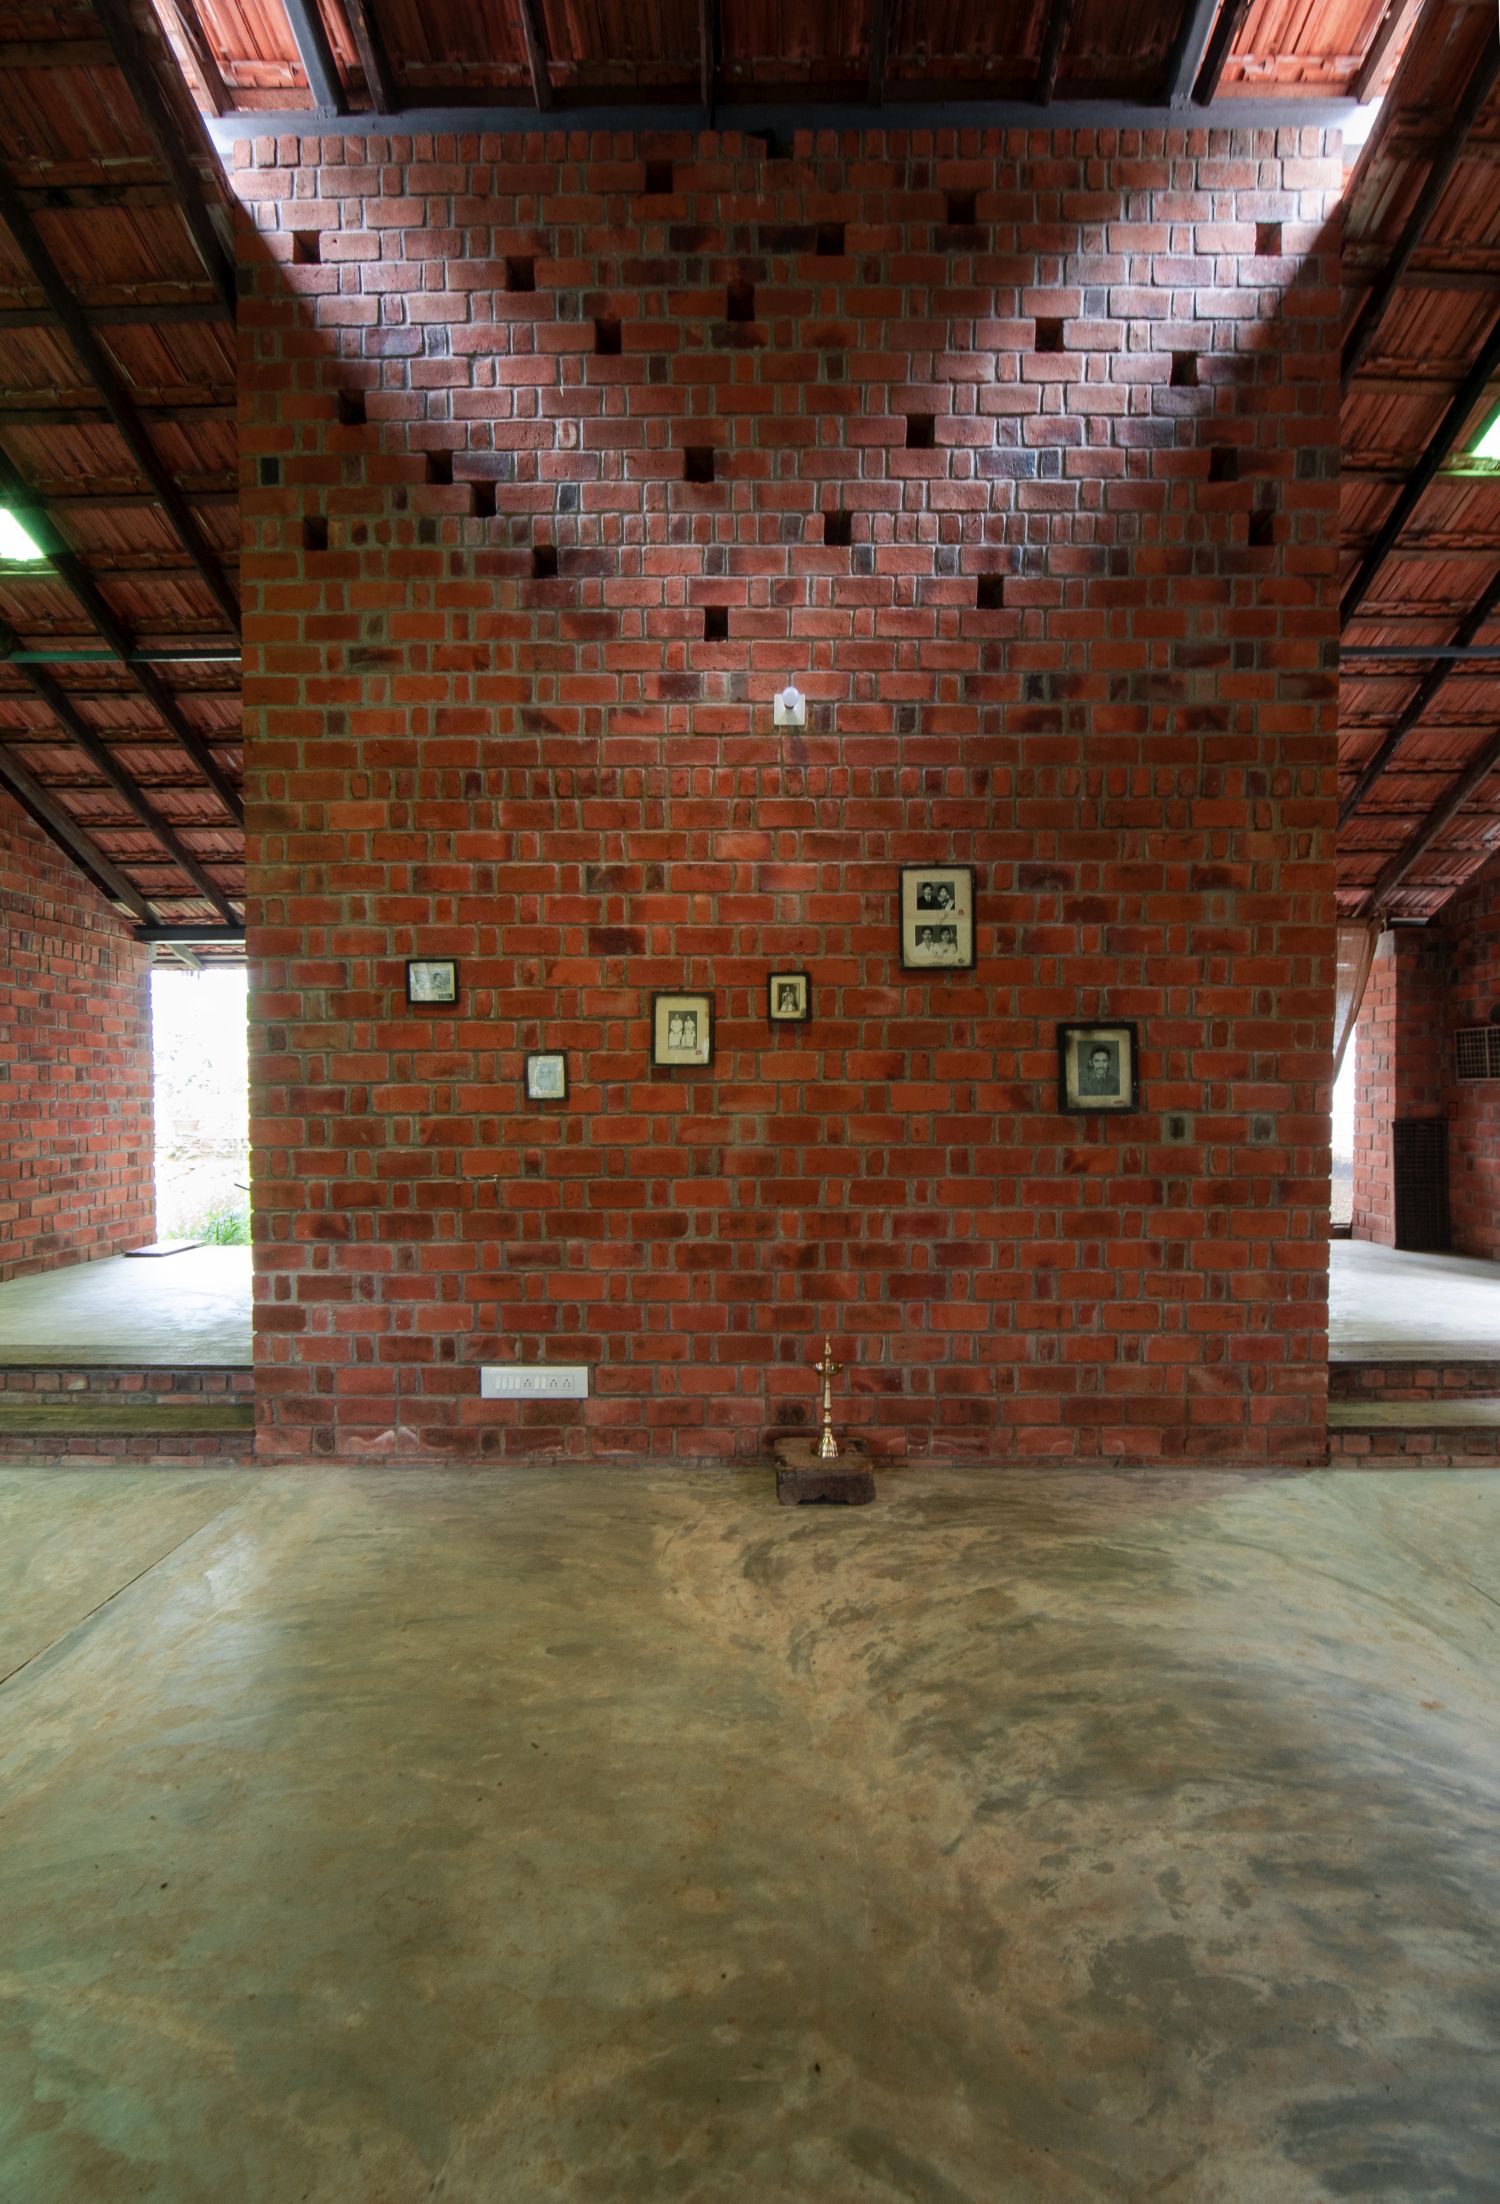 Memories of Objects in Trivandrum. by Fictional Project 4